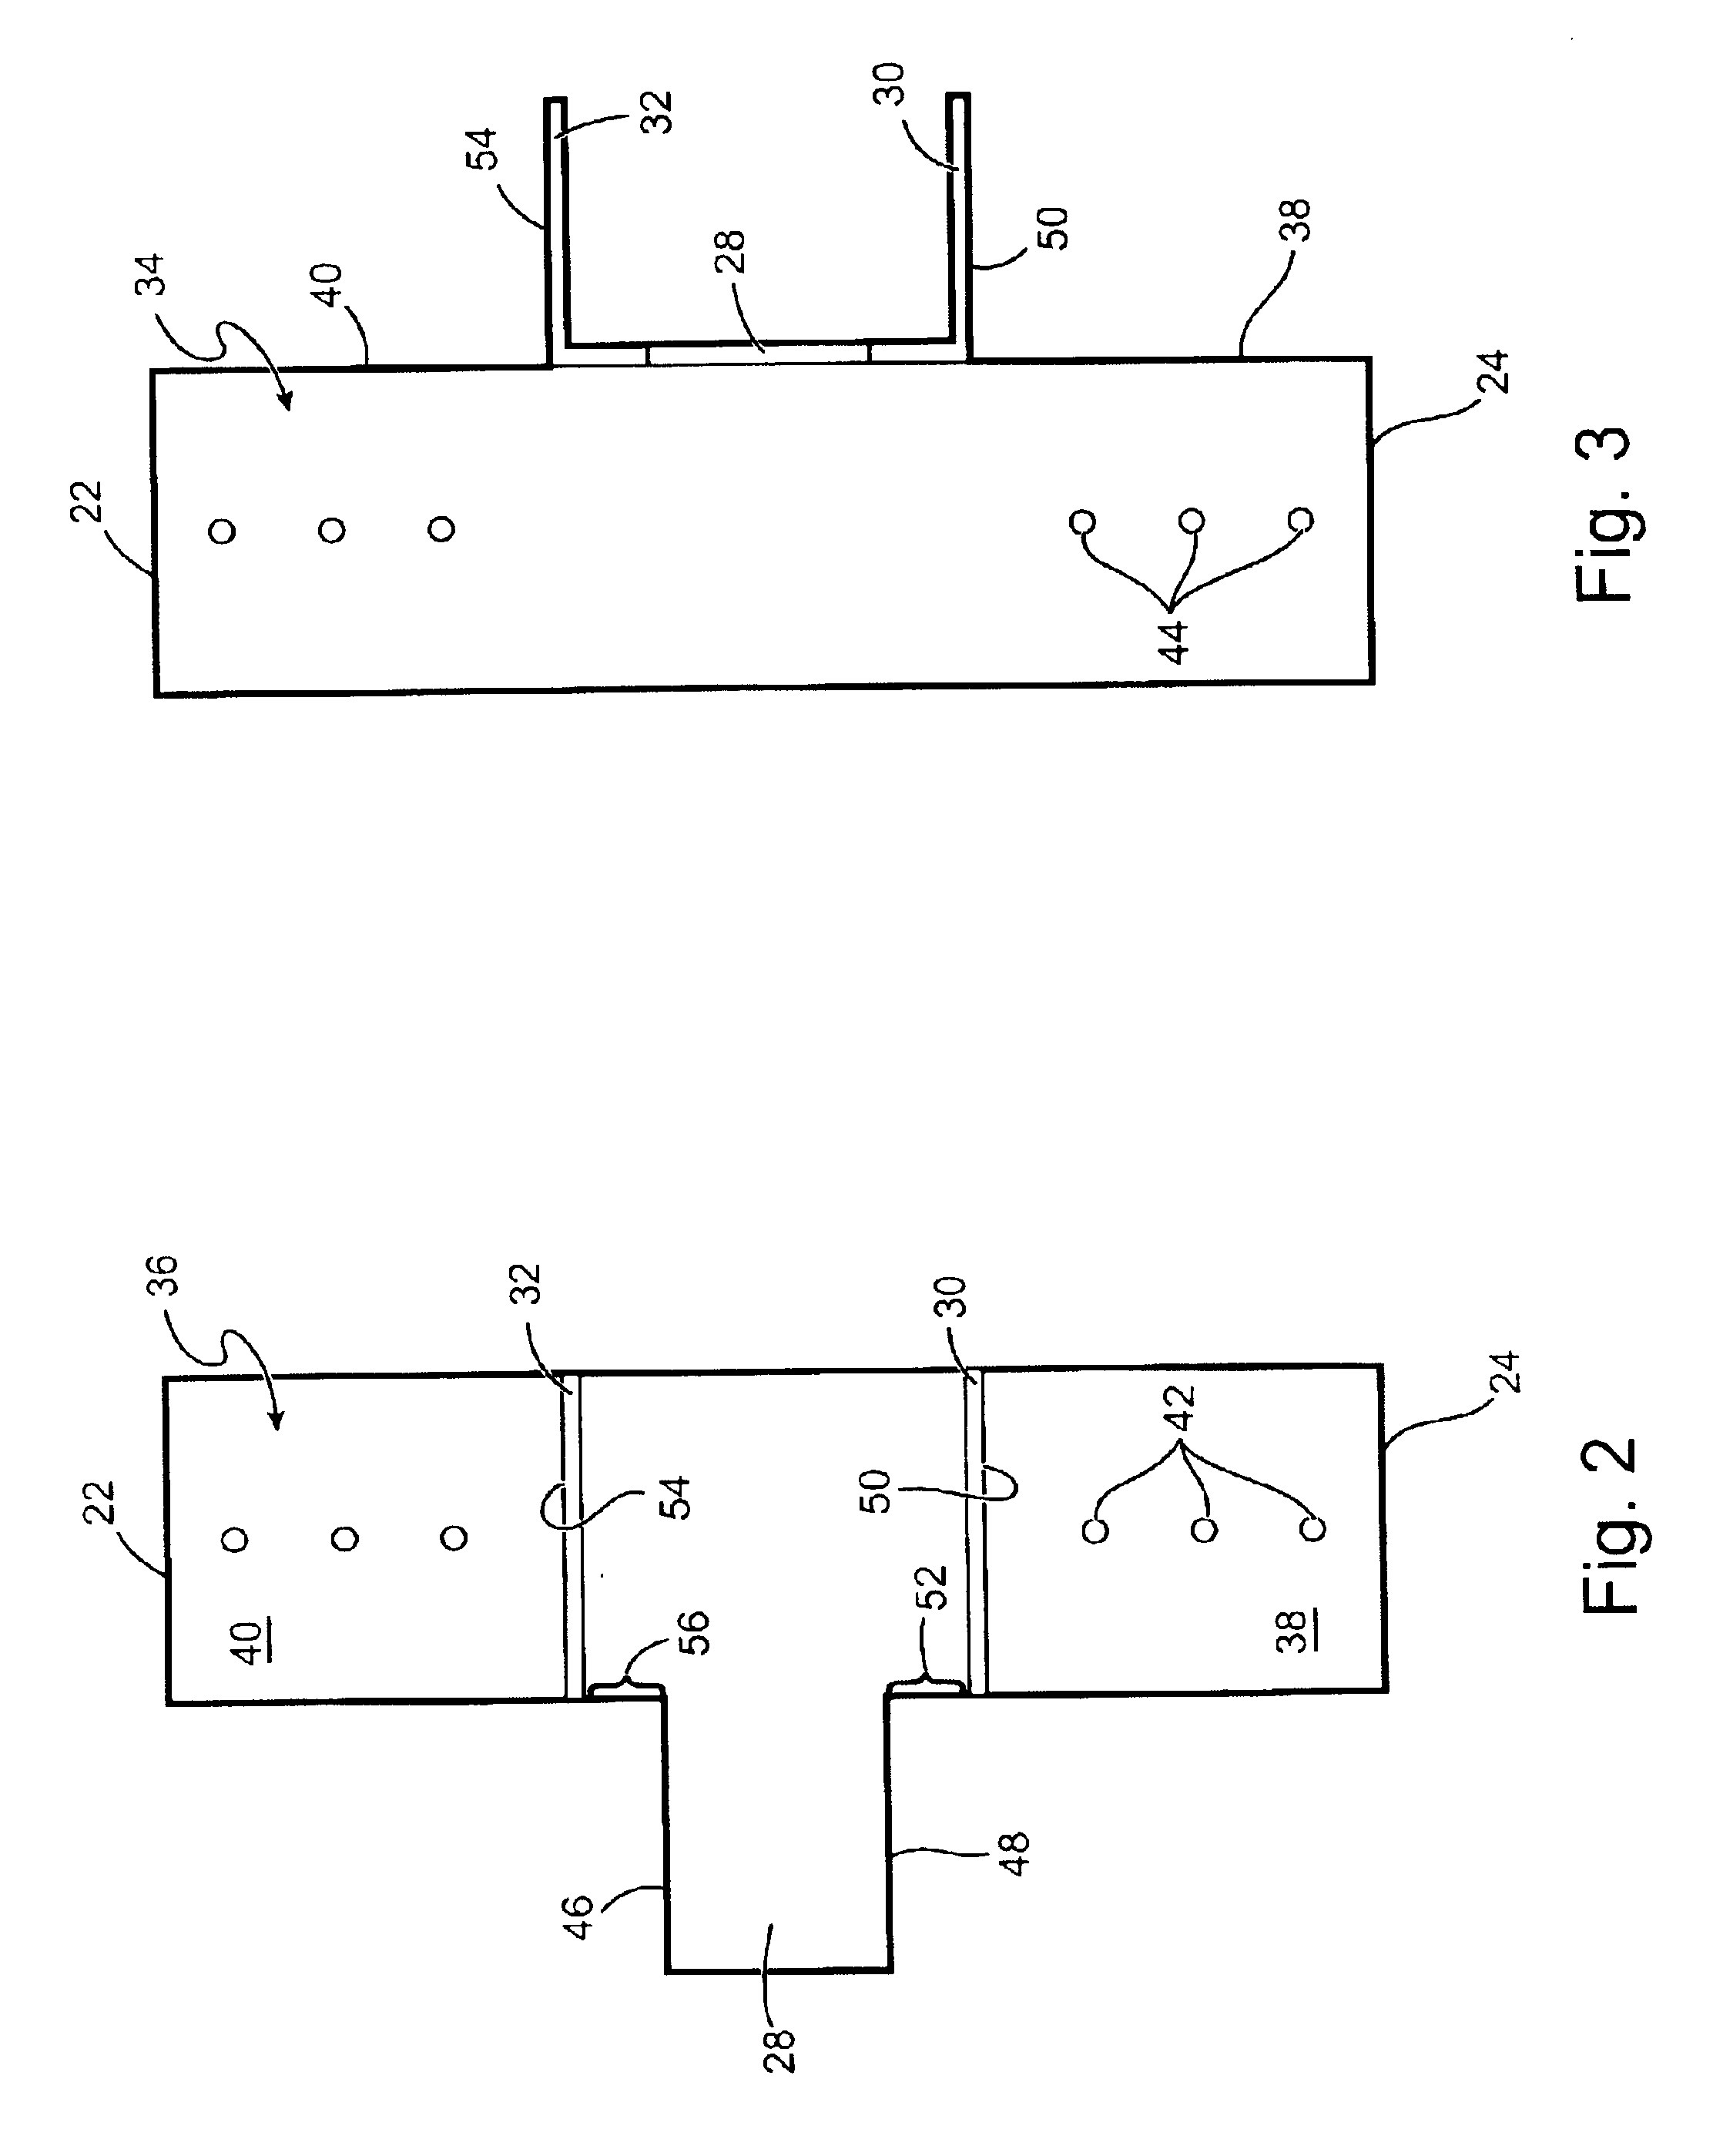 Method and apparatus for assembly of stair forms